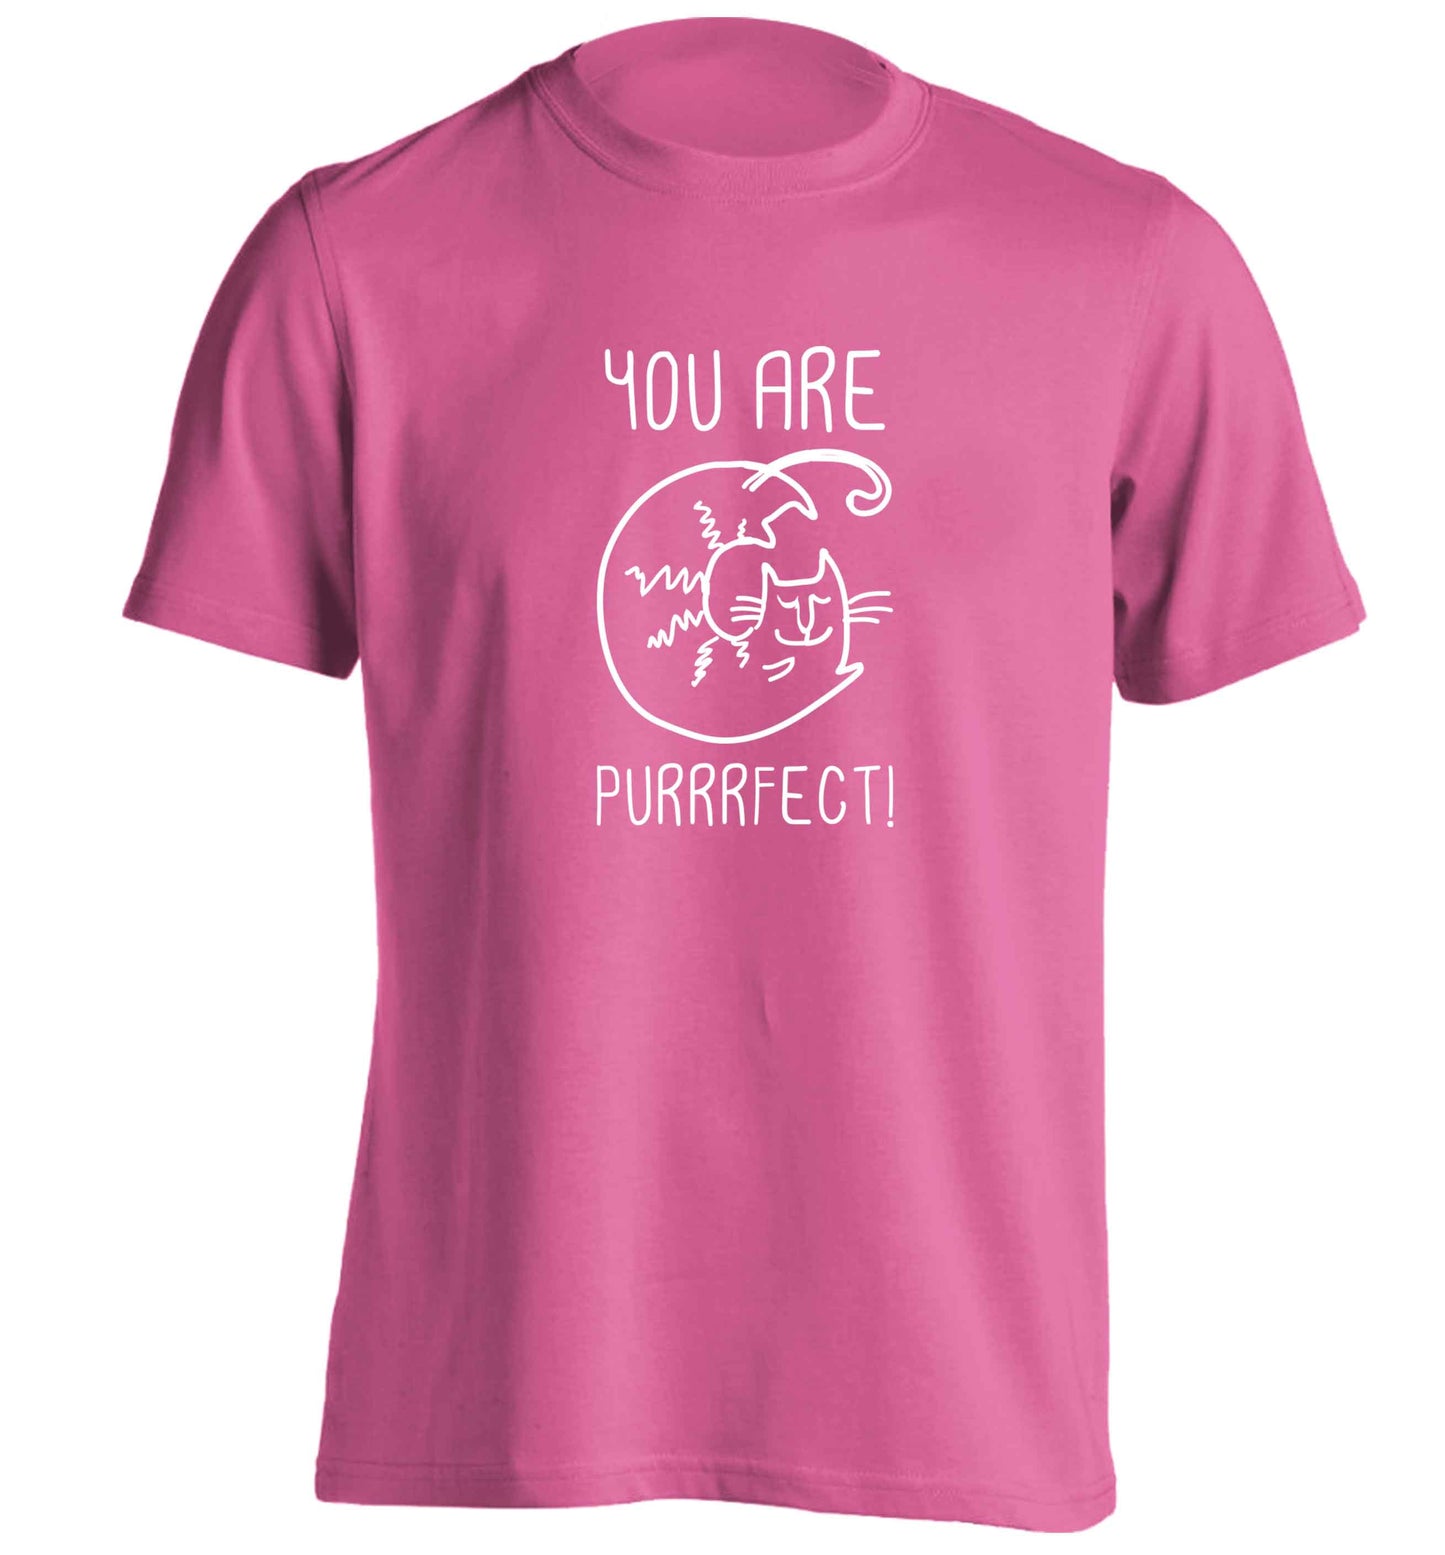 You are purrfect adults unisex pink Tshirt 2XL